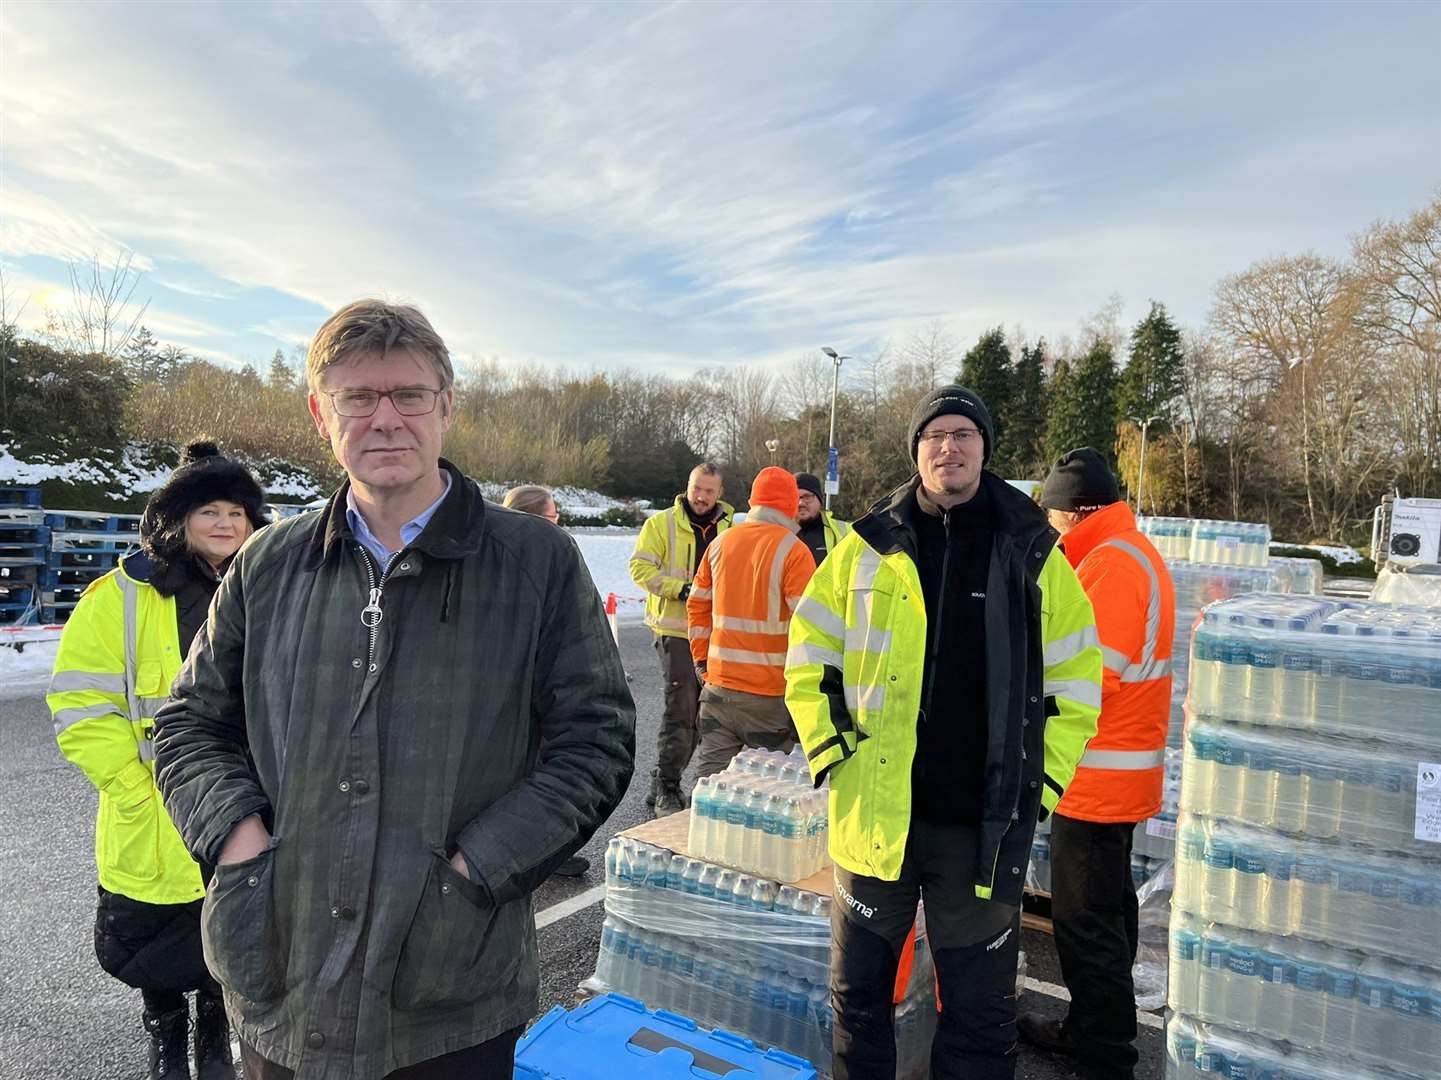 MP Greg Clark visited the town during the shortage in December